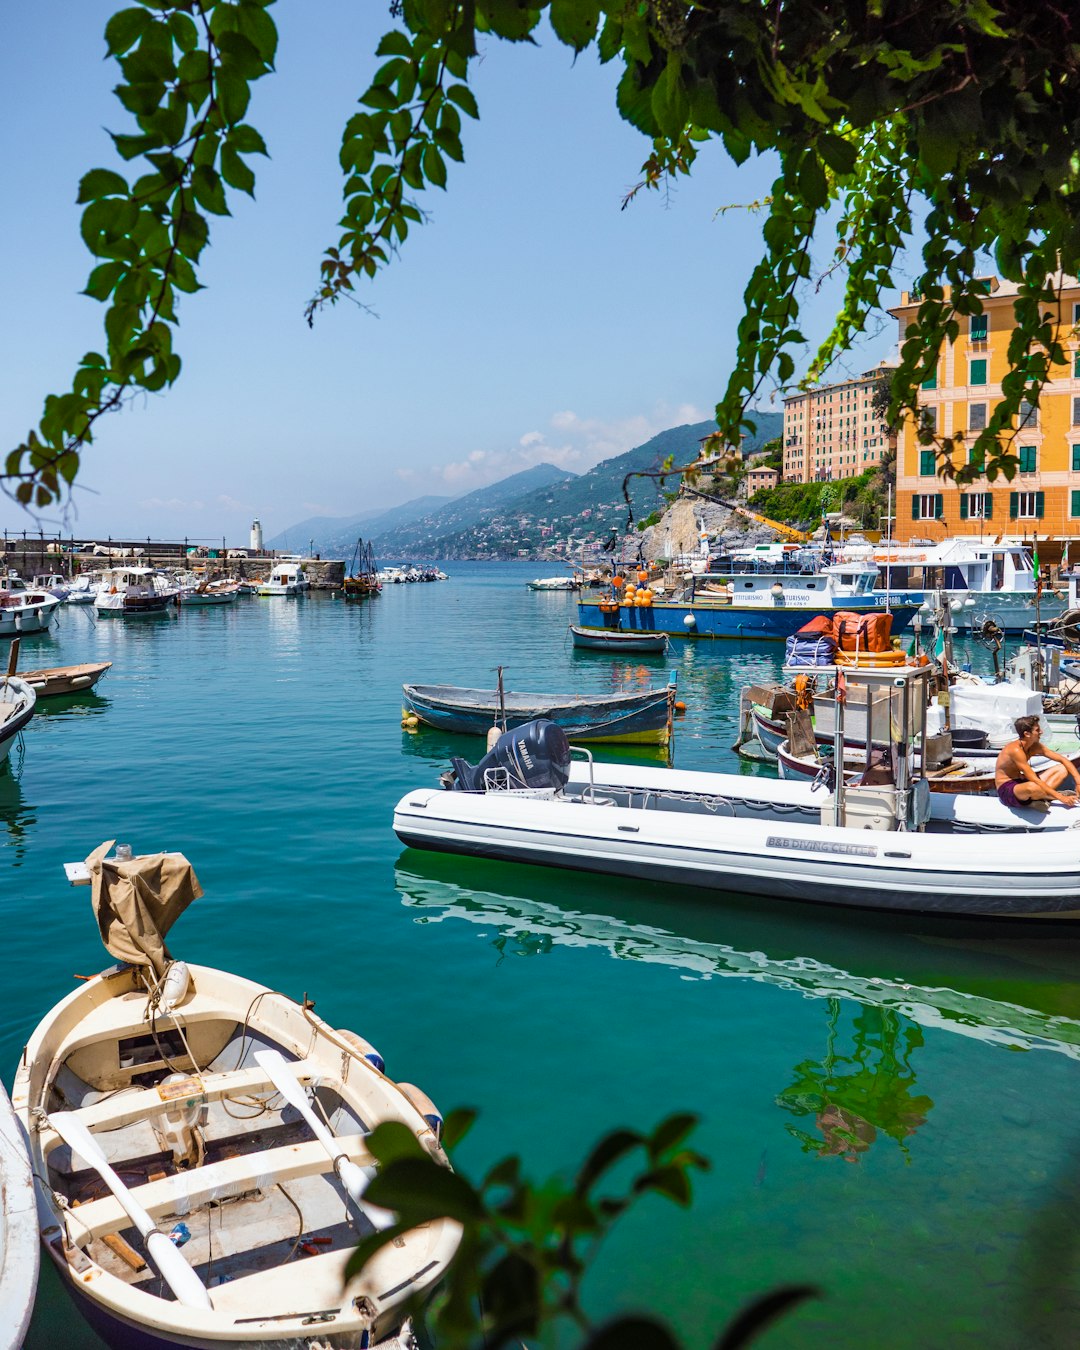 Travel Tips and Stories of Camogli in Italy